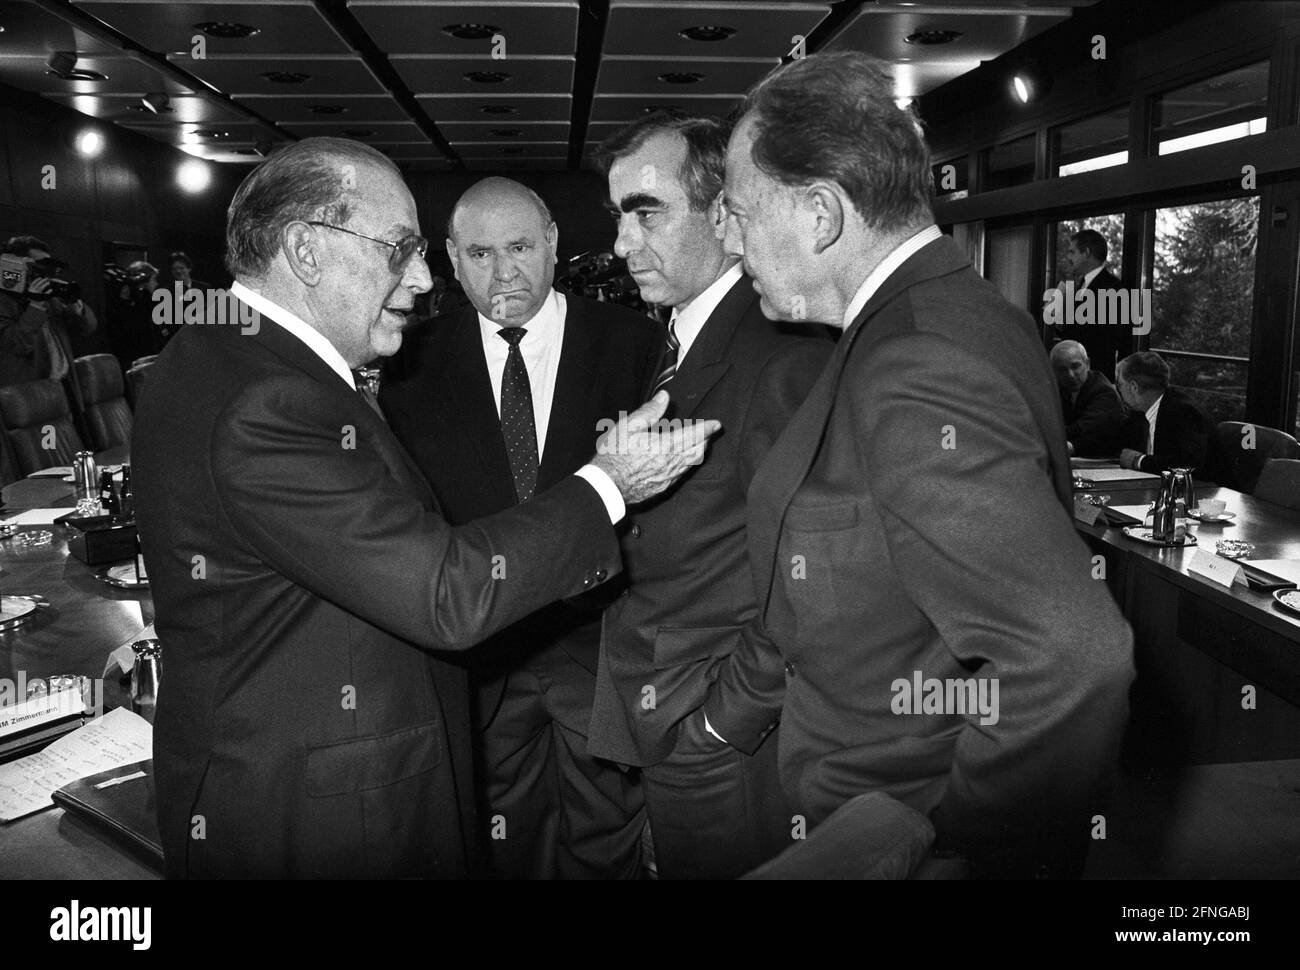 Germany, Bonn, 11.11.1989. Archive No.: 10-36-23 Cabinet meeting Photo: from left to right: Friedrich Zimmermann, Ignaz Kichle, Theo Waigel and Juergen Warnke in conversation [automated translation] Stock Photo